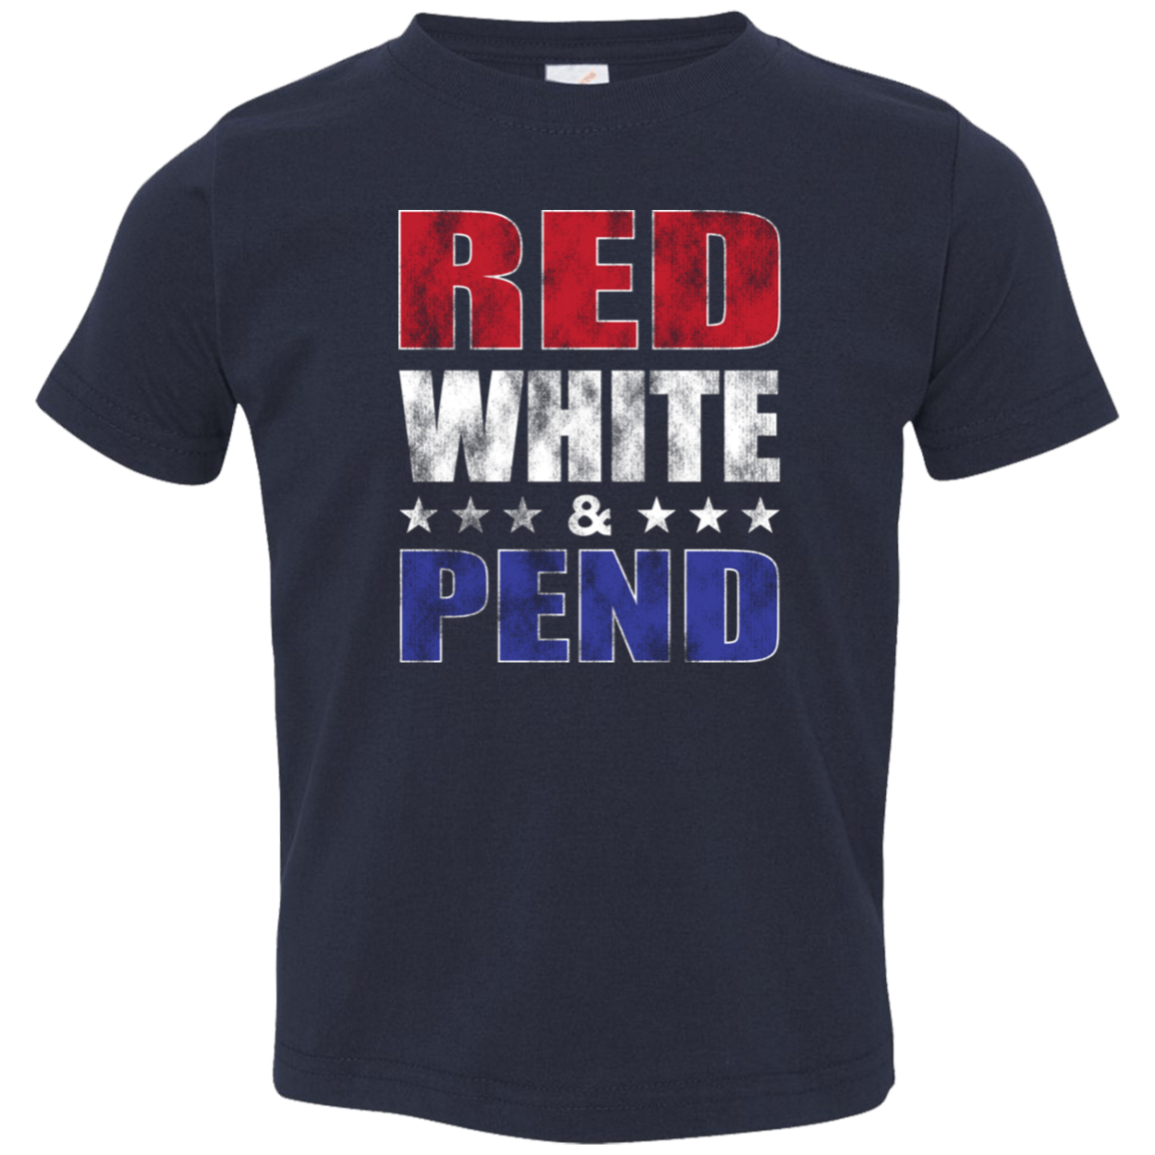 Red White & Pend Toddler Shirt